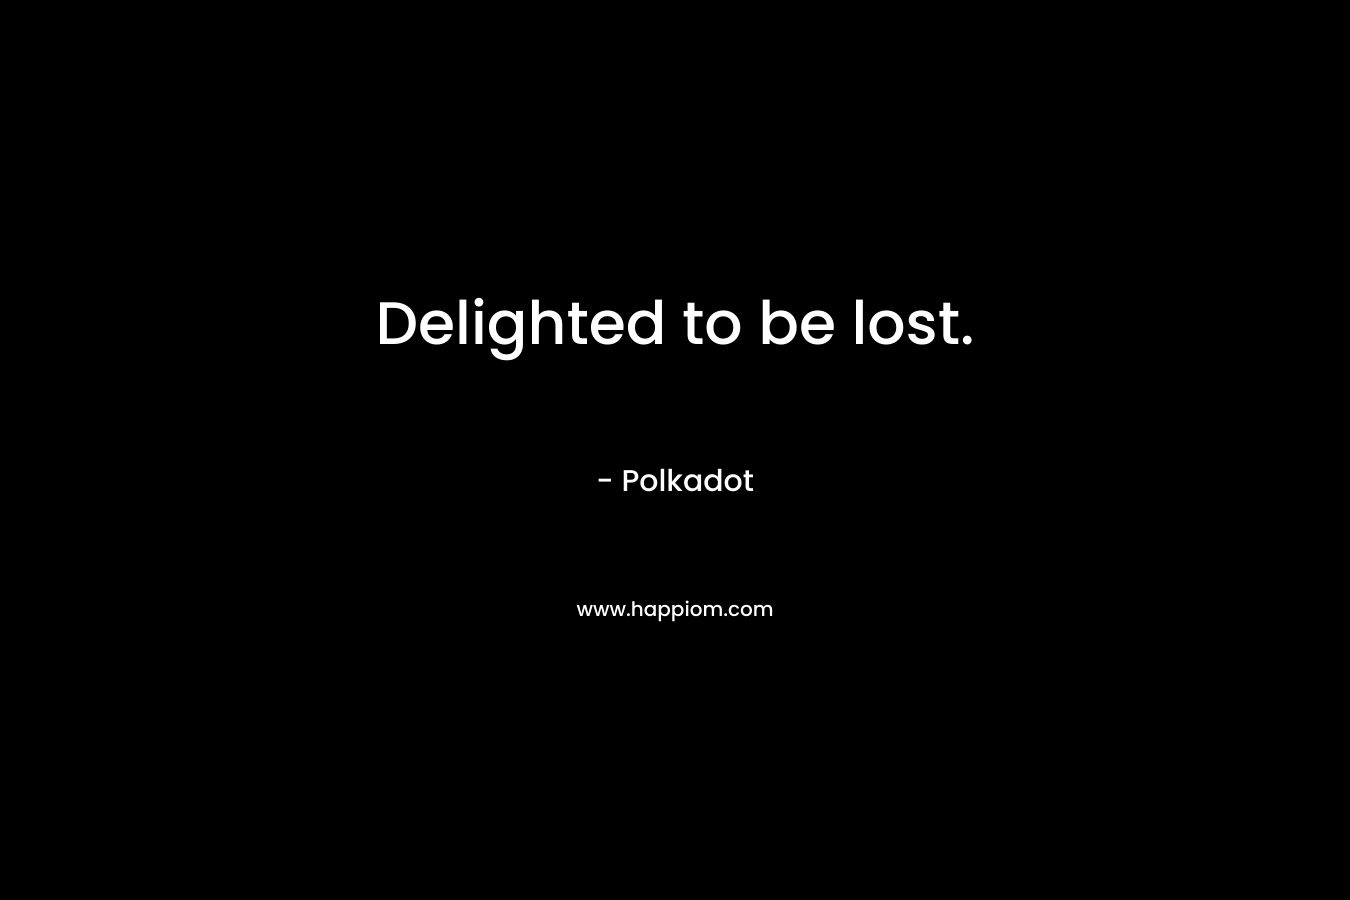 Delighted to be lost.